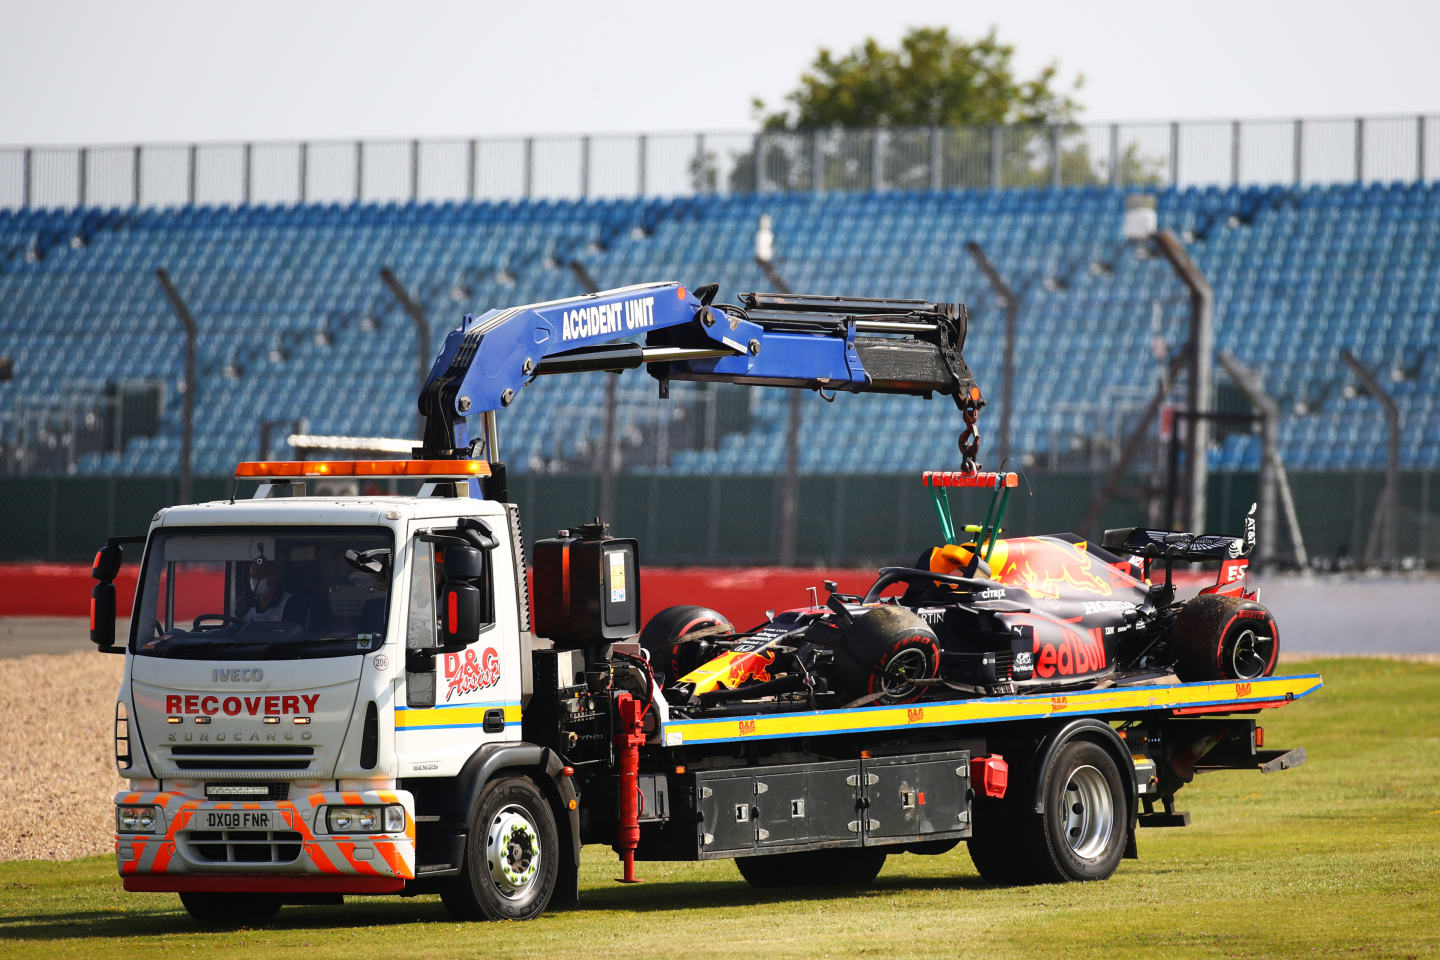 NORTHAMPTON, ENGLAND - JULY 31: The car of Alexander Albon of Thailand and Red Bull Racing is transported back to the pits on a recovery truck after crashing into a track barrier during practice for the F1 Grand Prix of Great Britain at Silverstone on July 31, 2020 in Northampton, England. (Photo by Bryn Lennon/Getty Images)